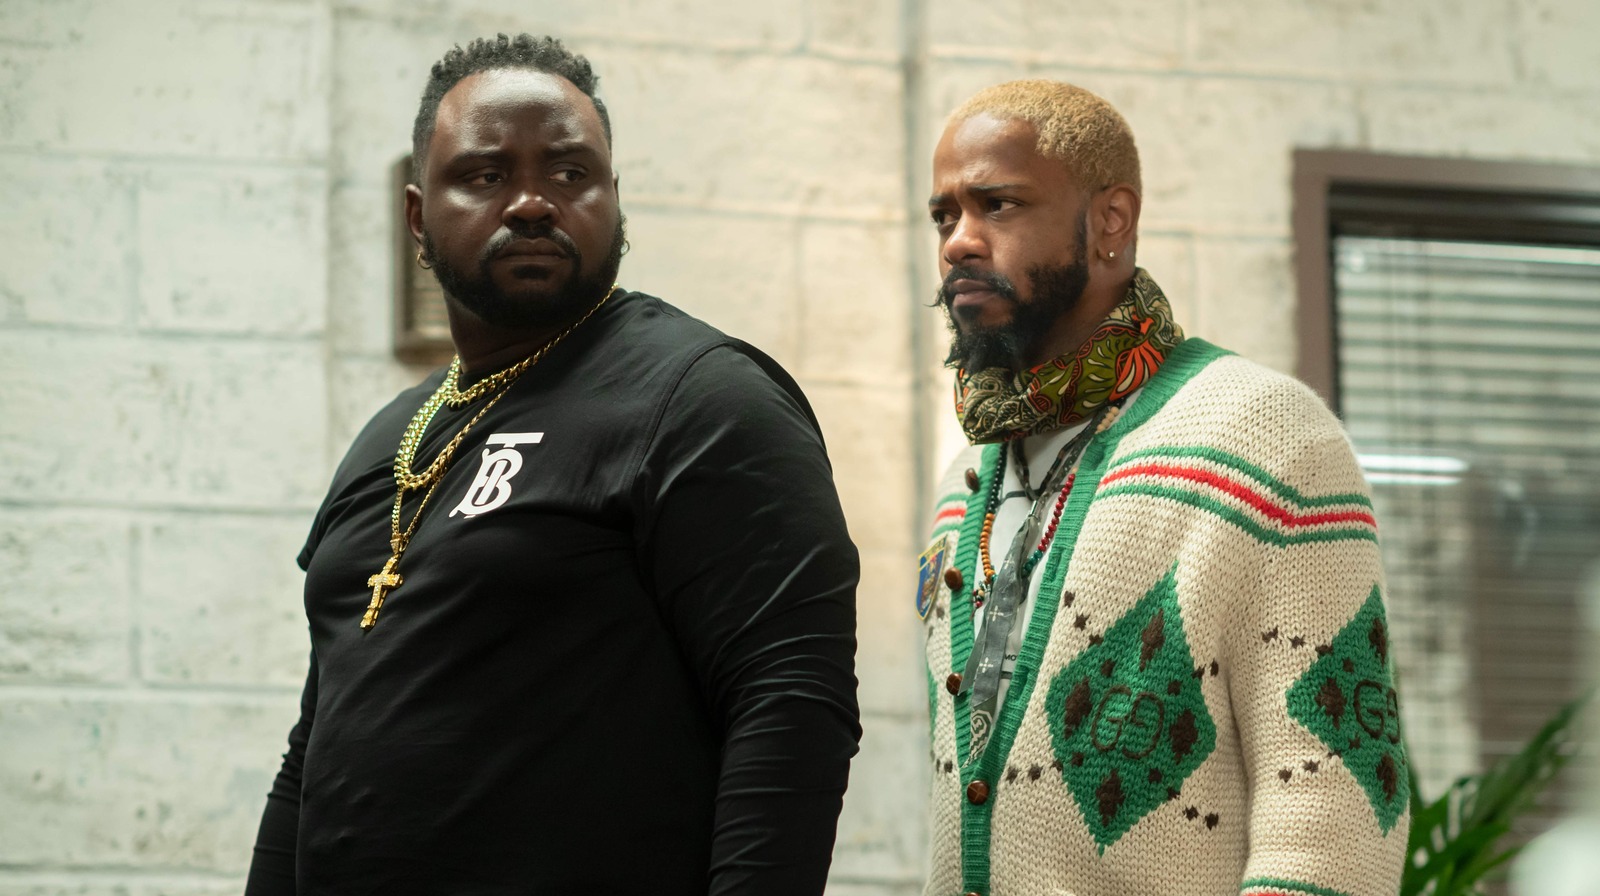 Atlanta Season 3 Episode 5 Looks For A Missing Phone With 'Cancer Attack'